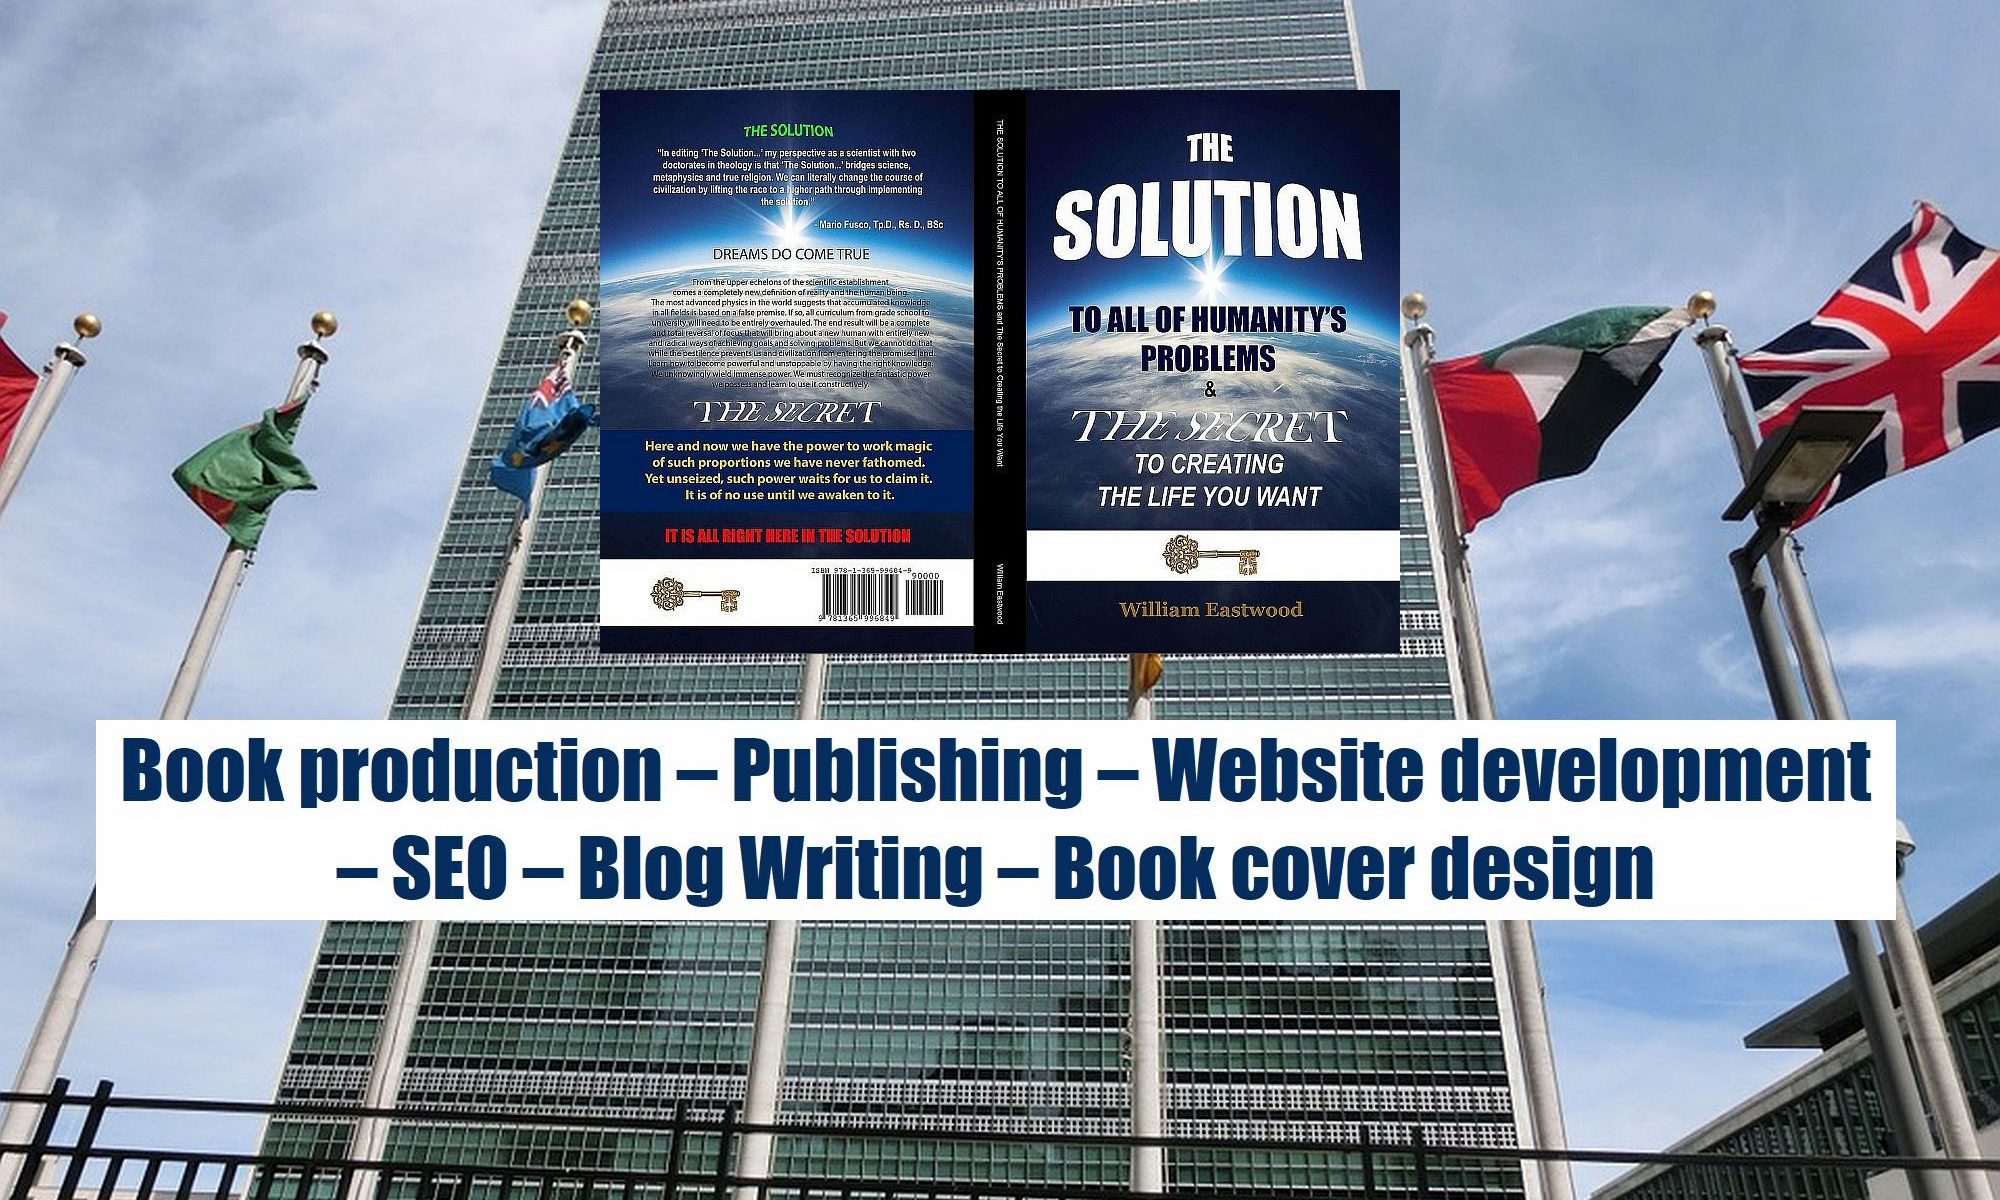 Blog-book-development-design-writing-seo-assistance-services-for-authors-website-owners-businesses-2000